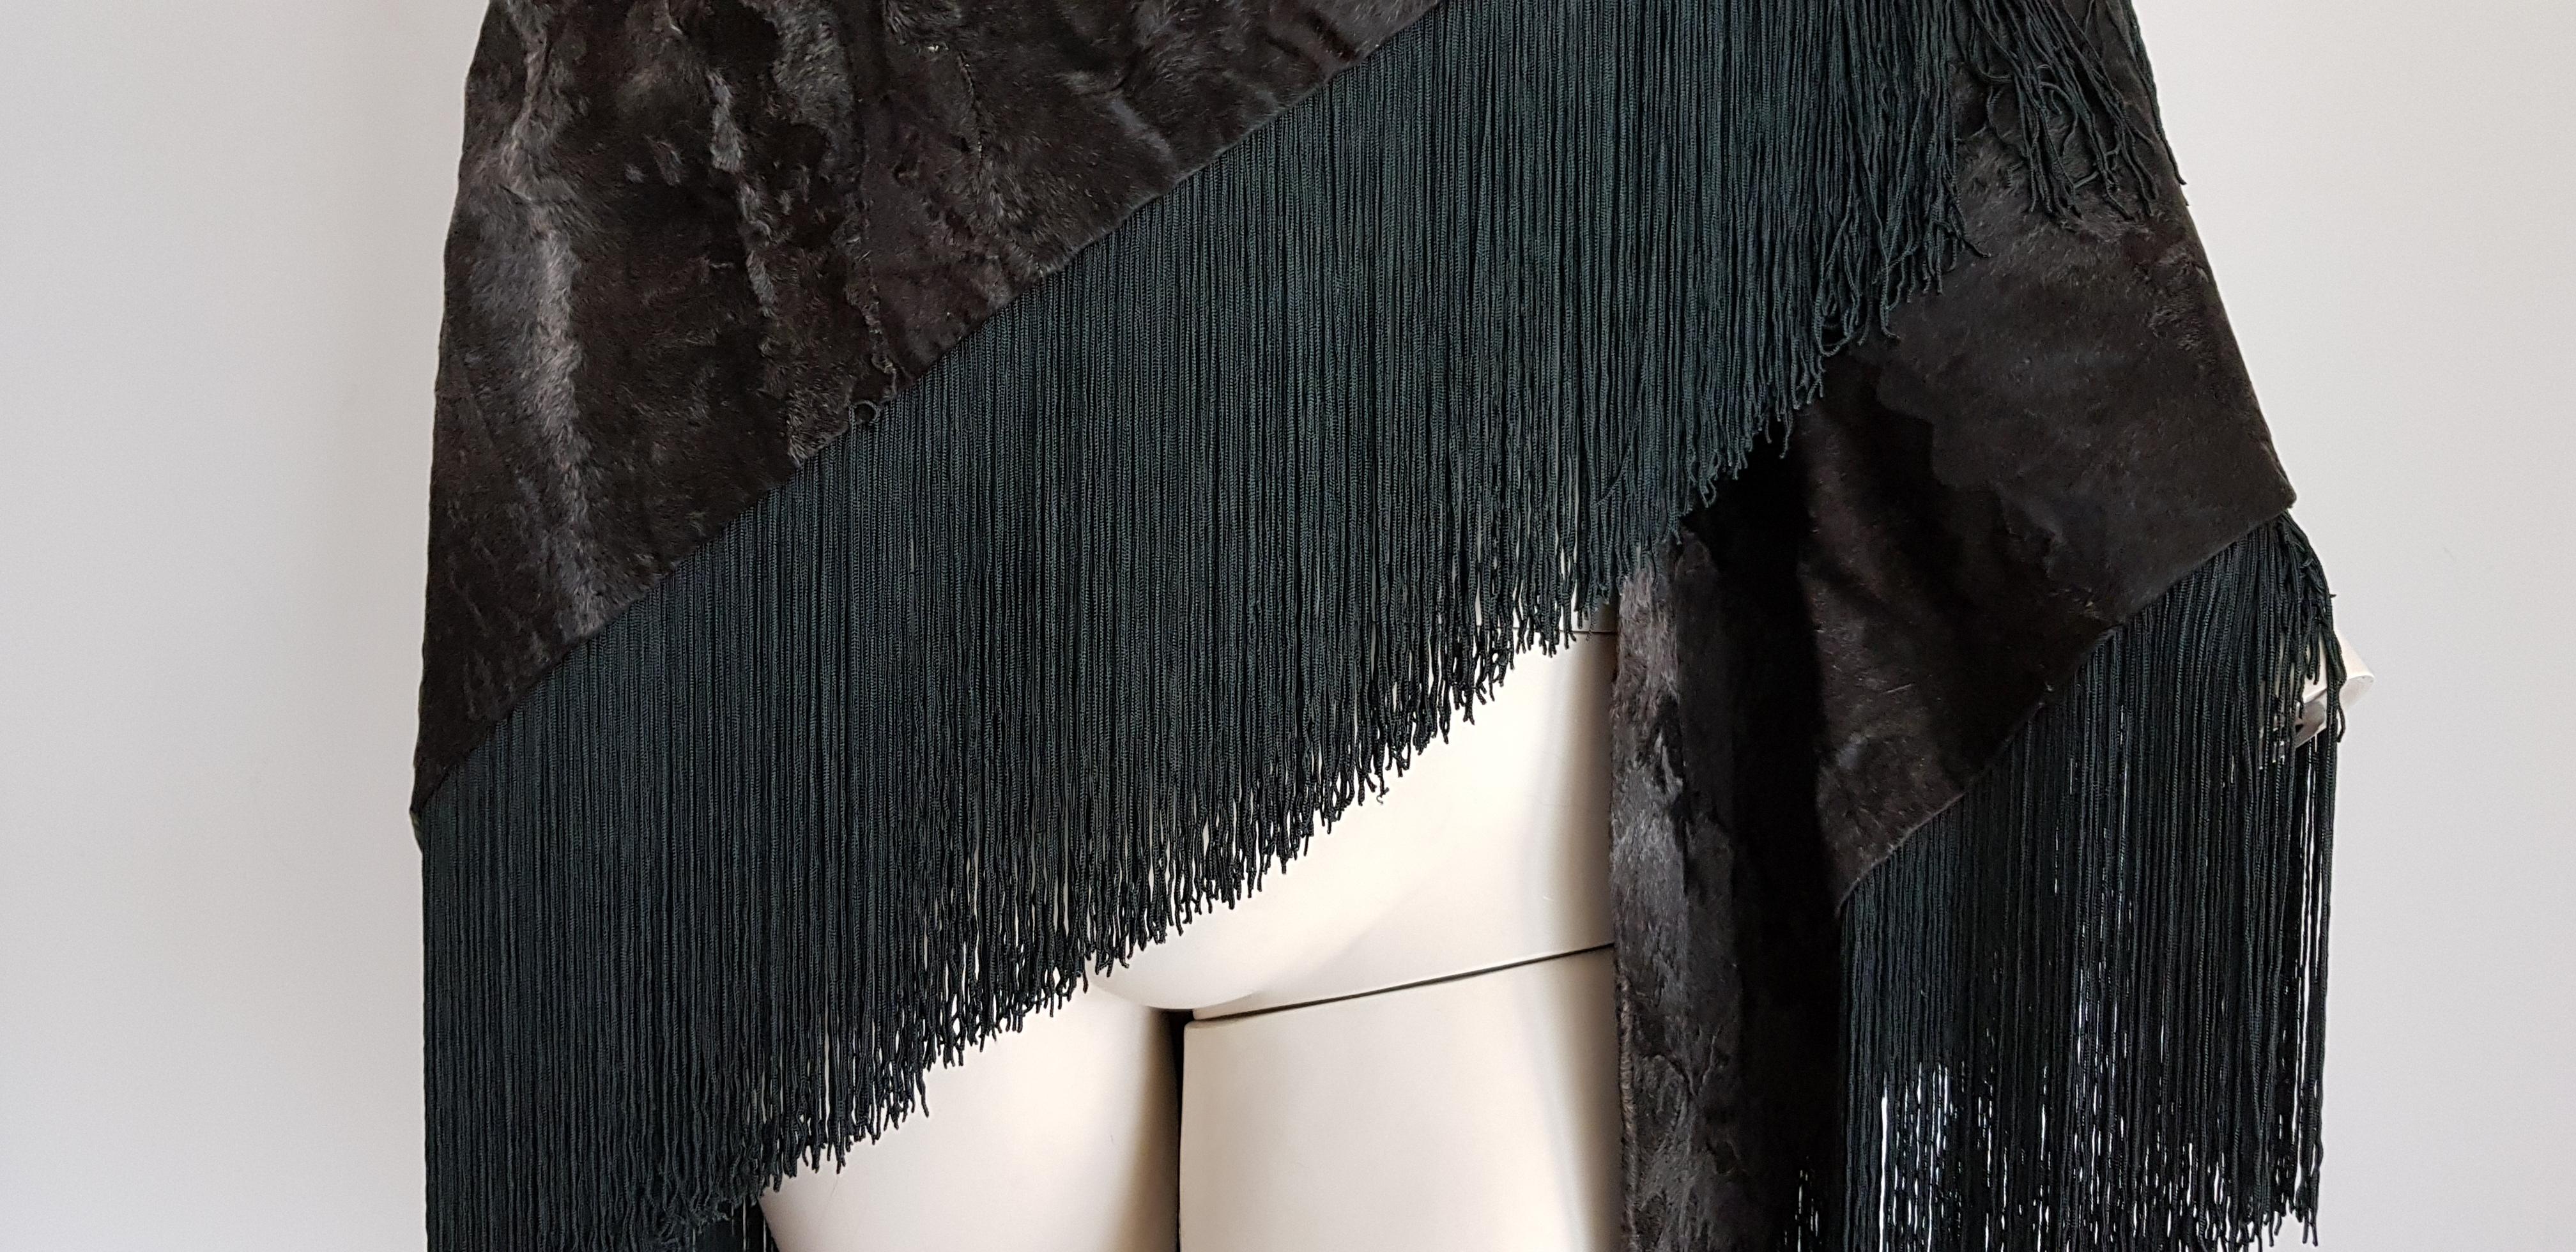 HERMES wild Russian breshvans fur shawl, with fringes, silk lined, dark greeen grey color, collectible item - Unworn, New

Triangular shape, measures in cm: triangle high 104, width 220.
TO CONVERT: cm x 0.39 = inch.
By 